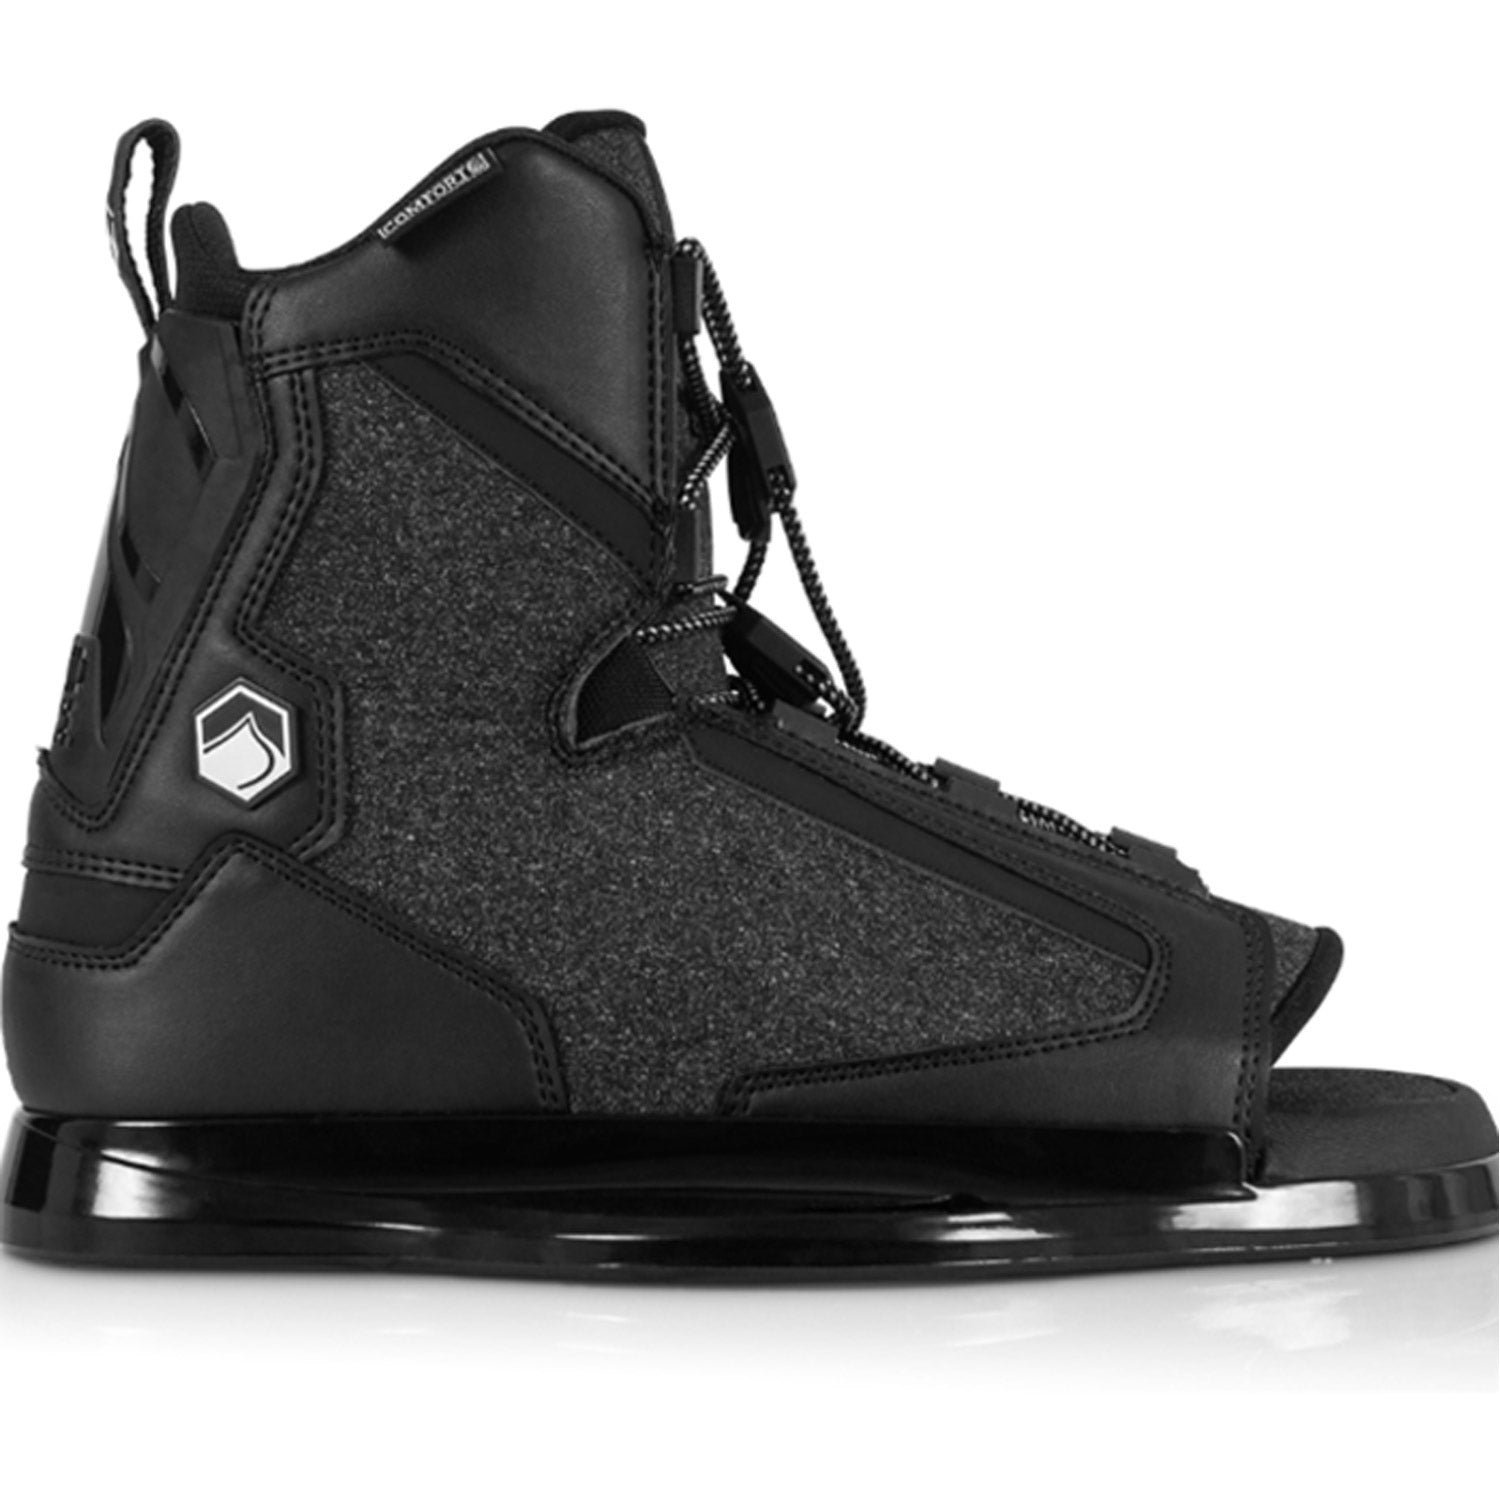 Index 6R OT Wakeboard Boots